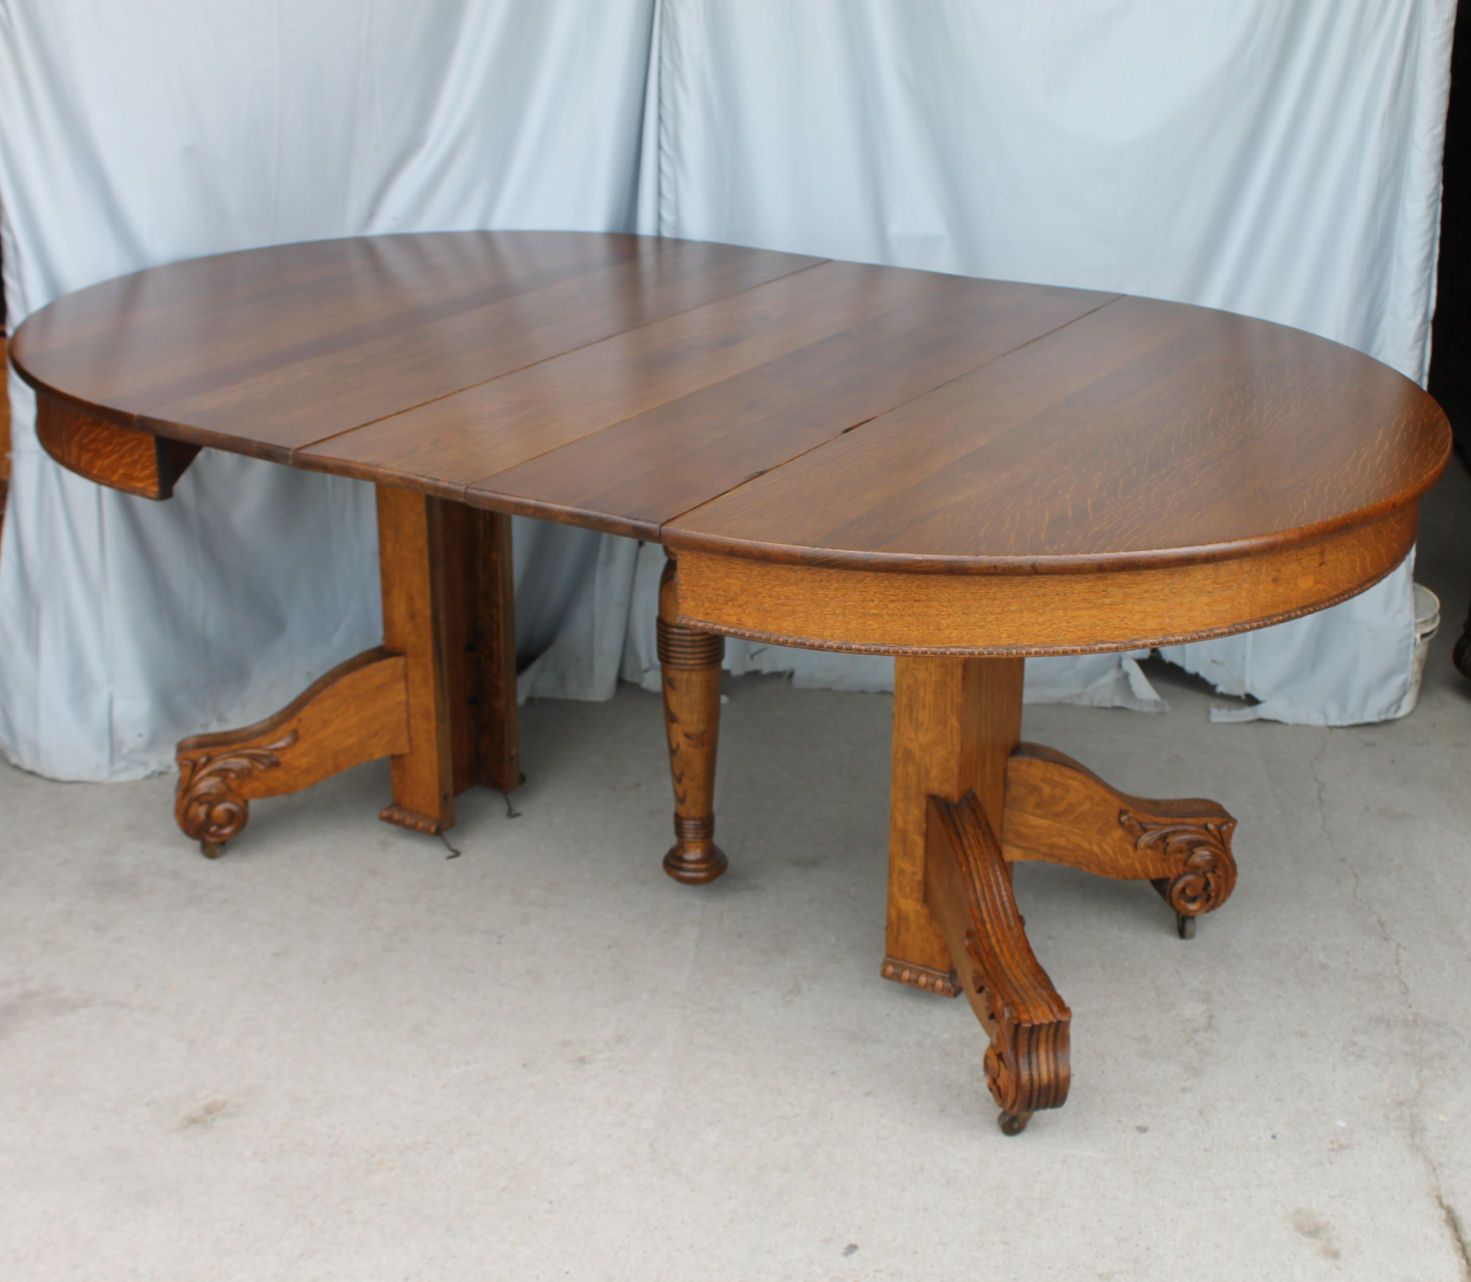 Bargain John'S Antiques » Blog Archive Antique Round Oak With Best And Newest Vintage Brown Round Dining Tables (View 12 of 15)